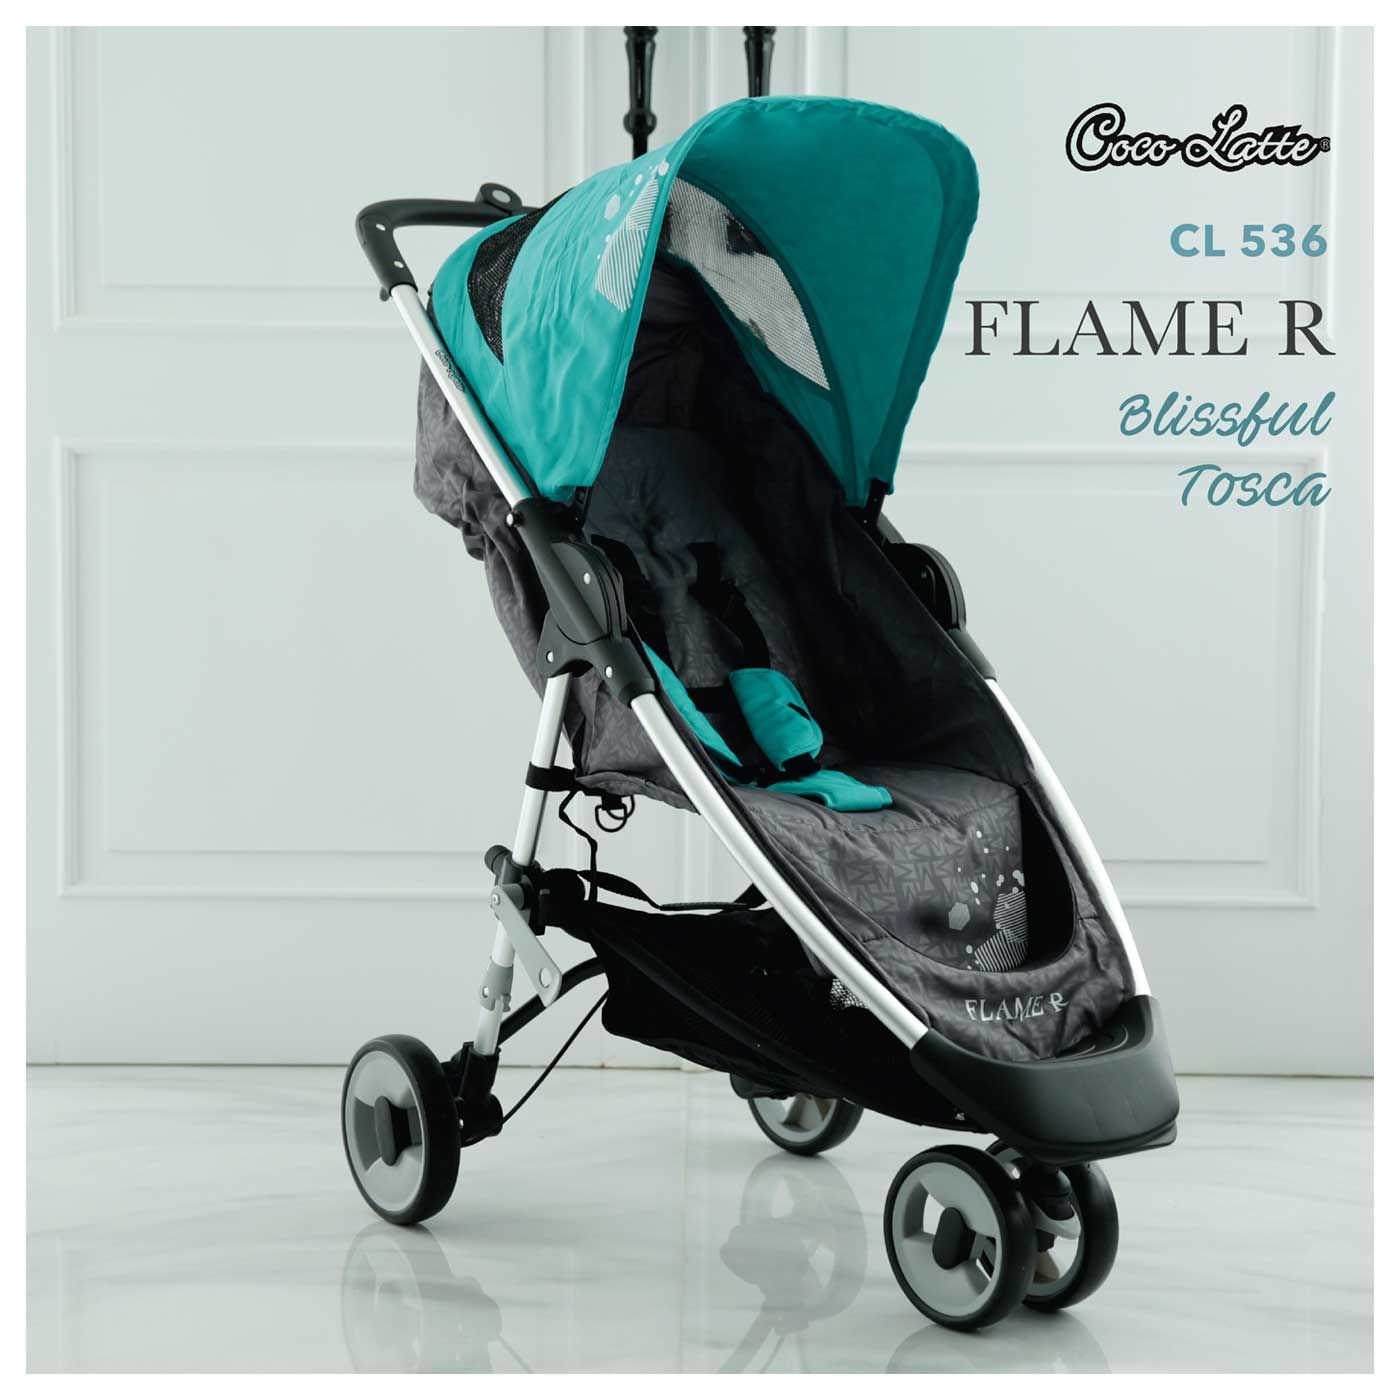 Cocolatte Stroller CL 536 Flame R- Blissful Tosca - 1